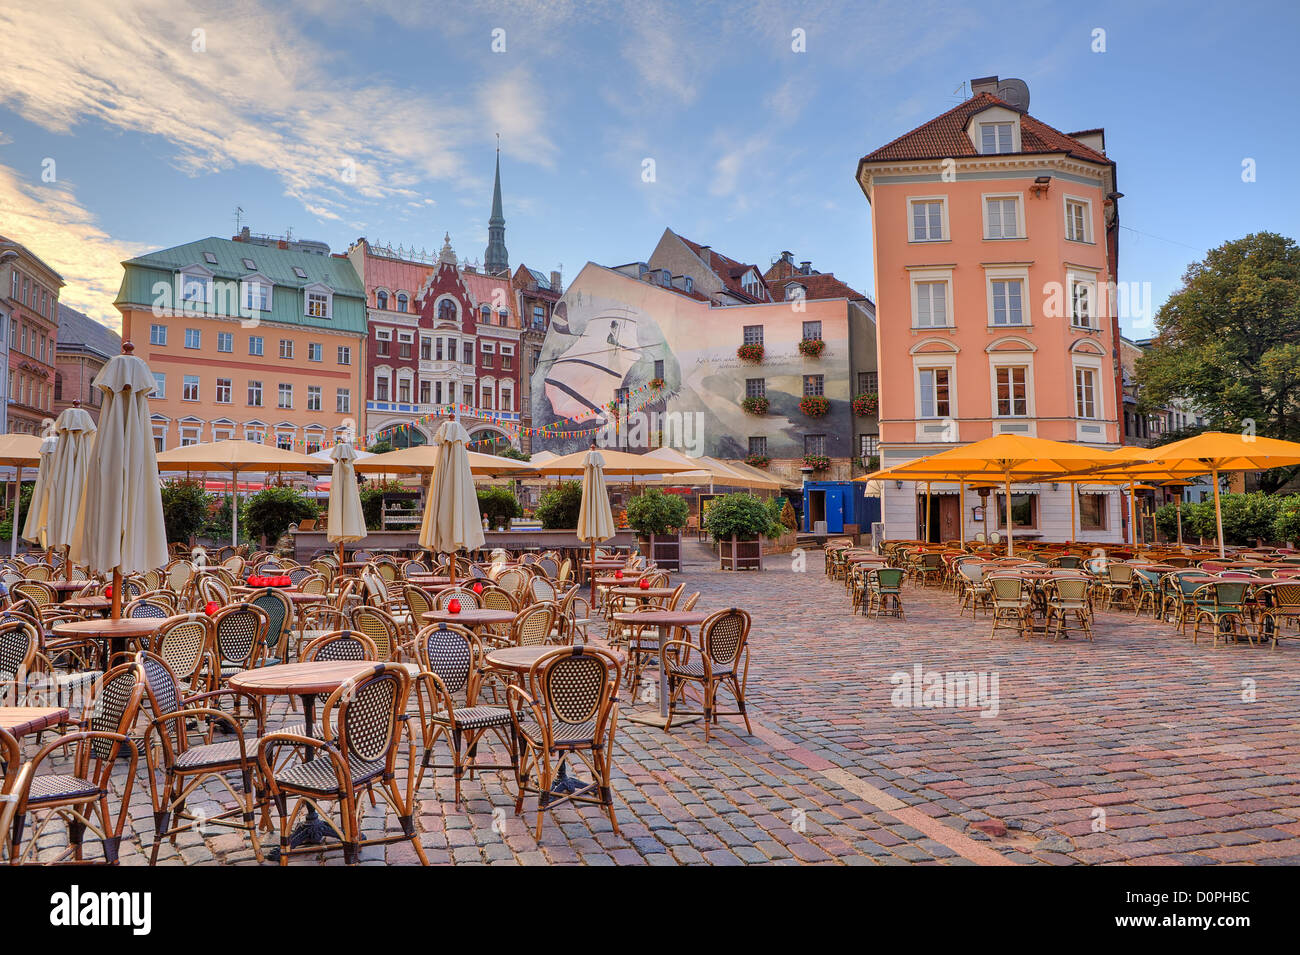 Cobbled city square with outdoor restaurants among colorful buildings in Riga, Latvia. Stock Photo